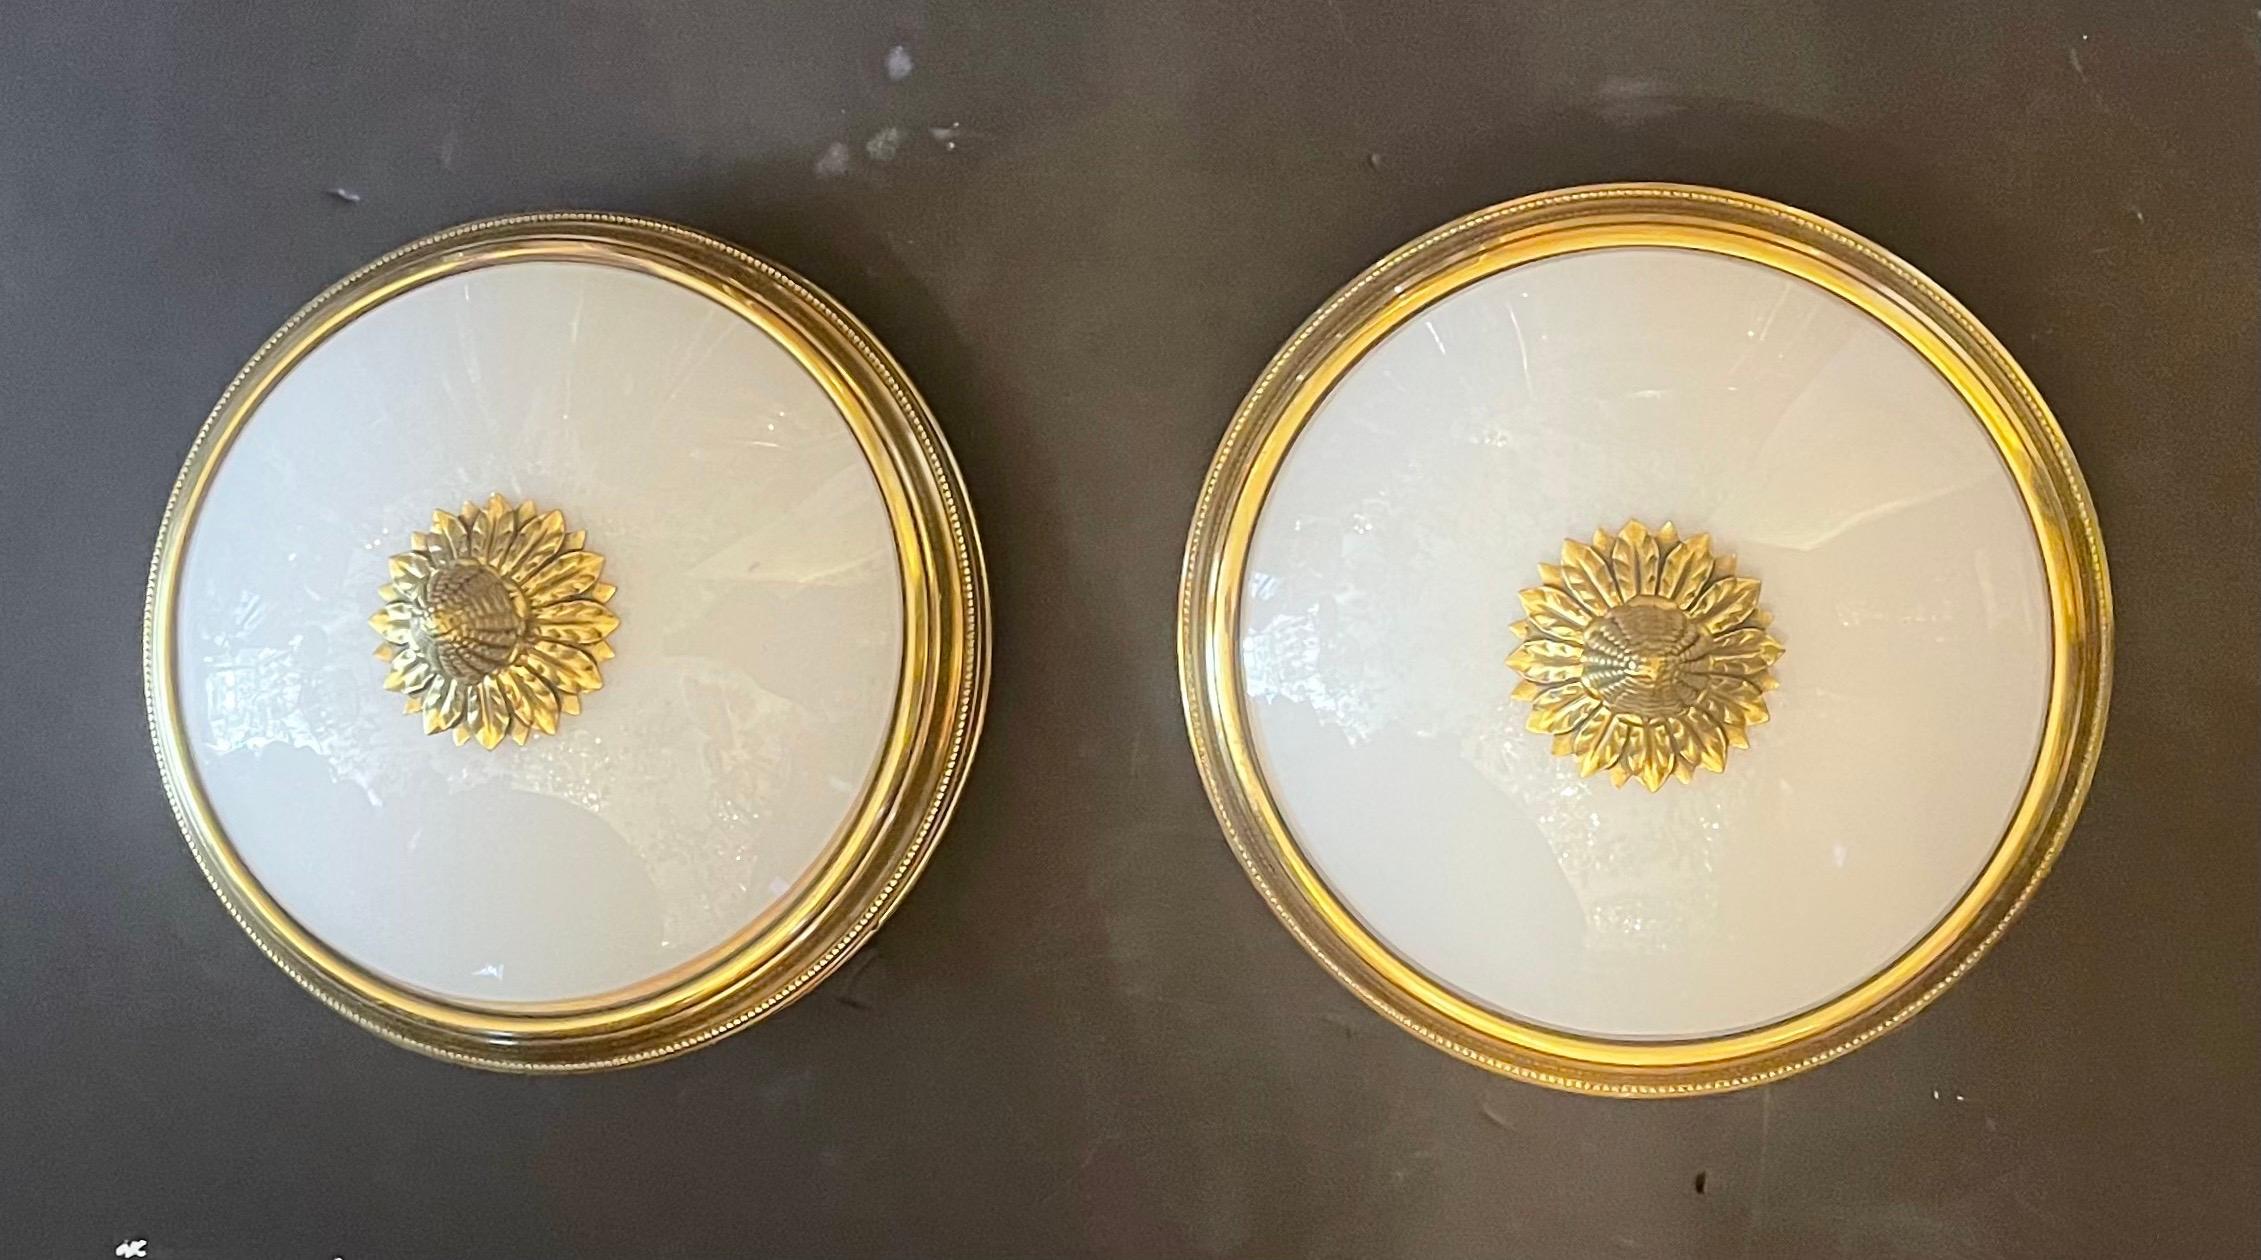 A wonderful pair of Sherle Wagner style polished brass & white milk glass regency flush mount light fixtures.

Each sold separately.